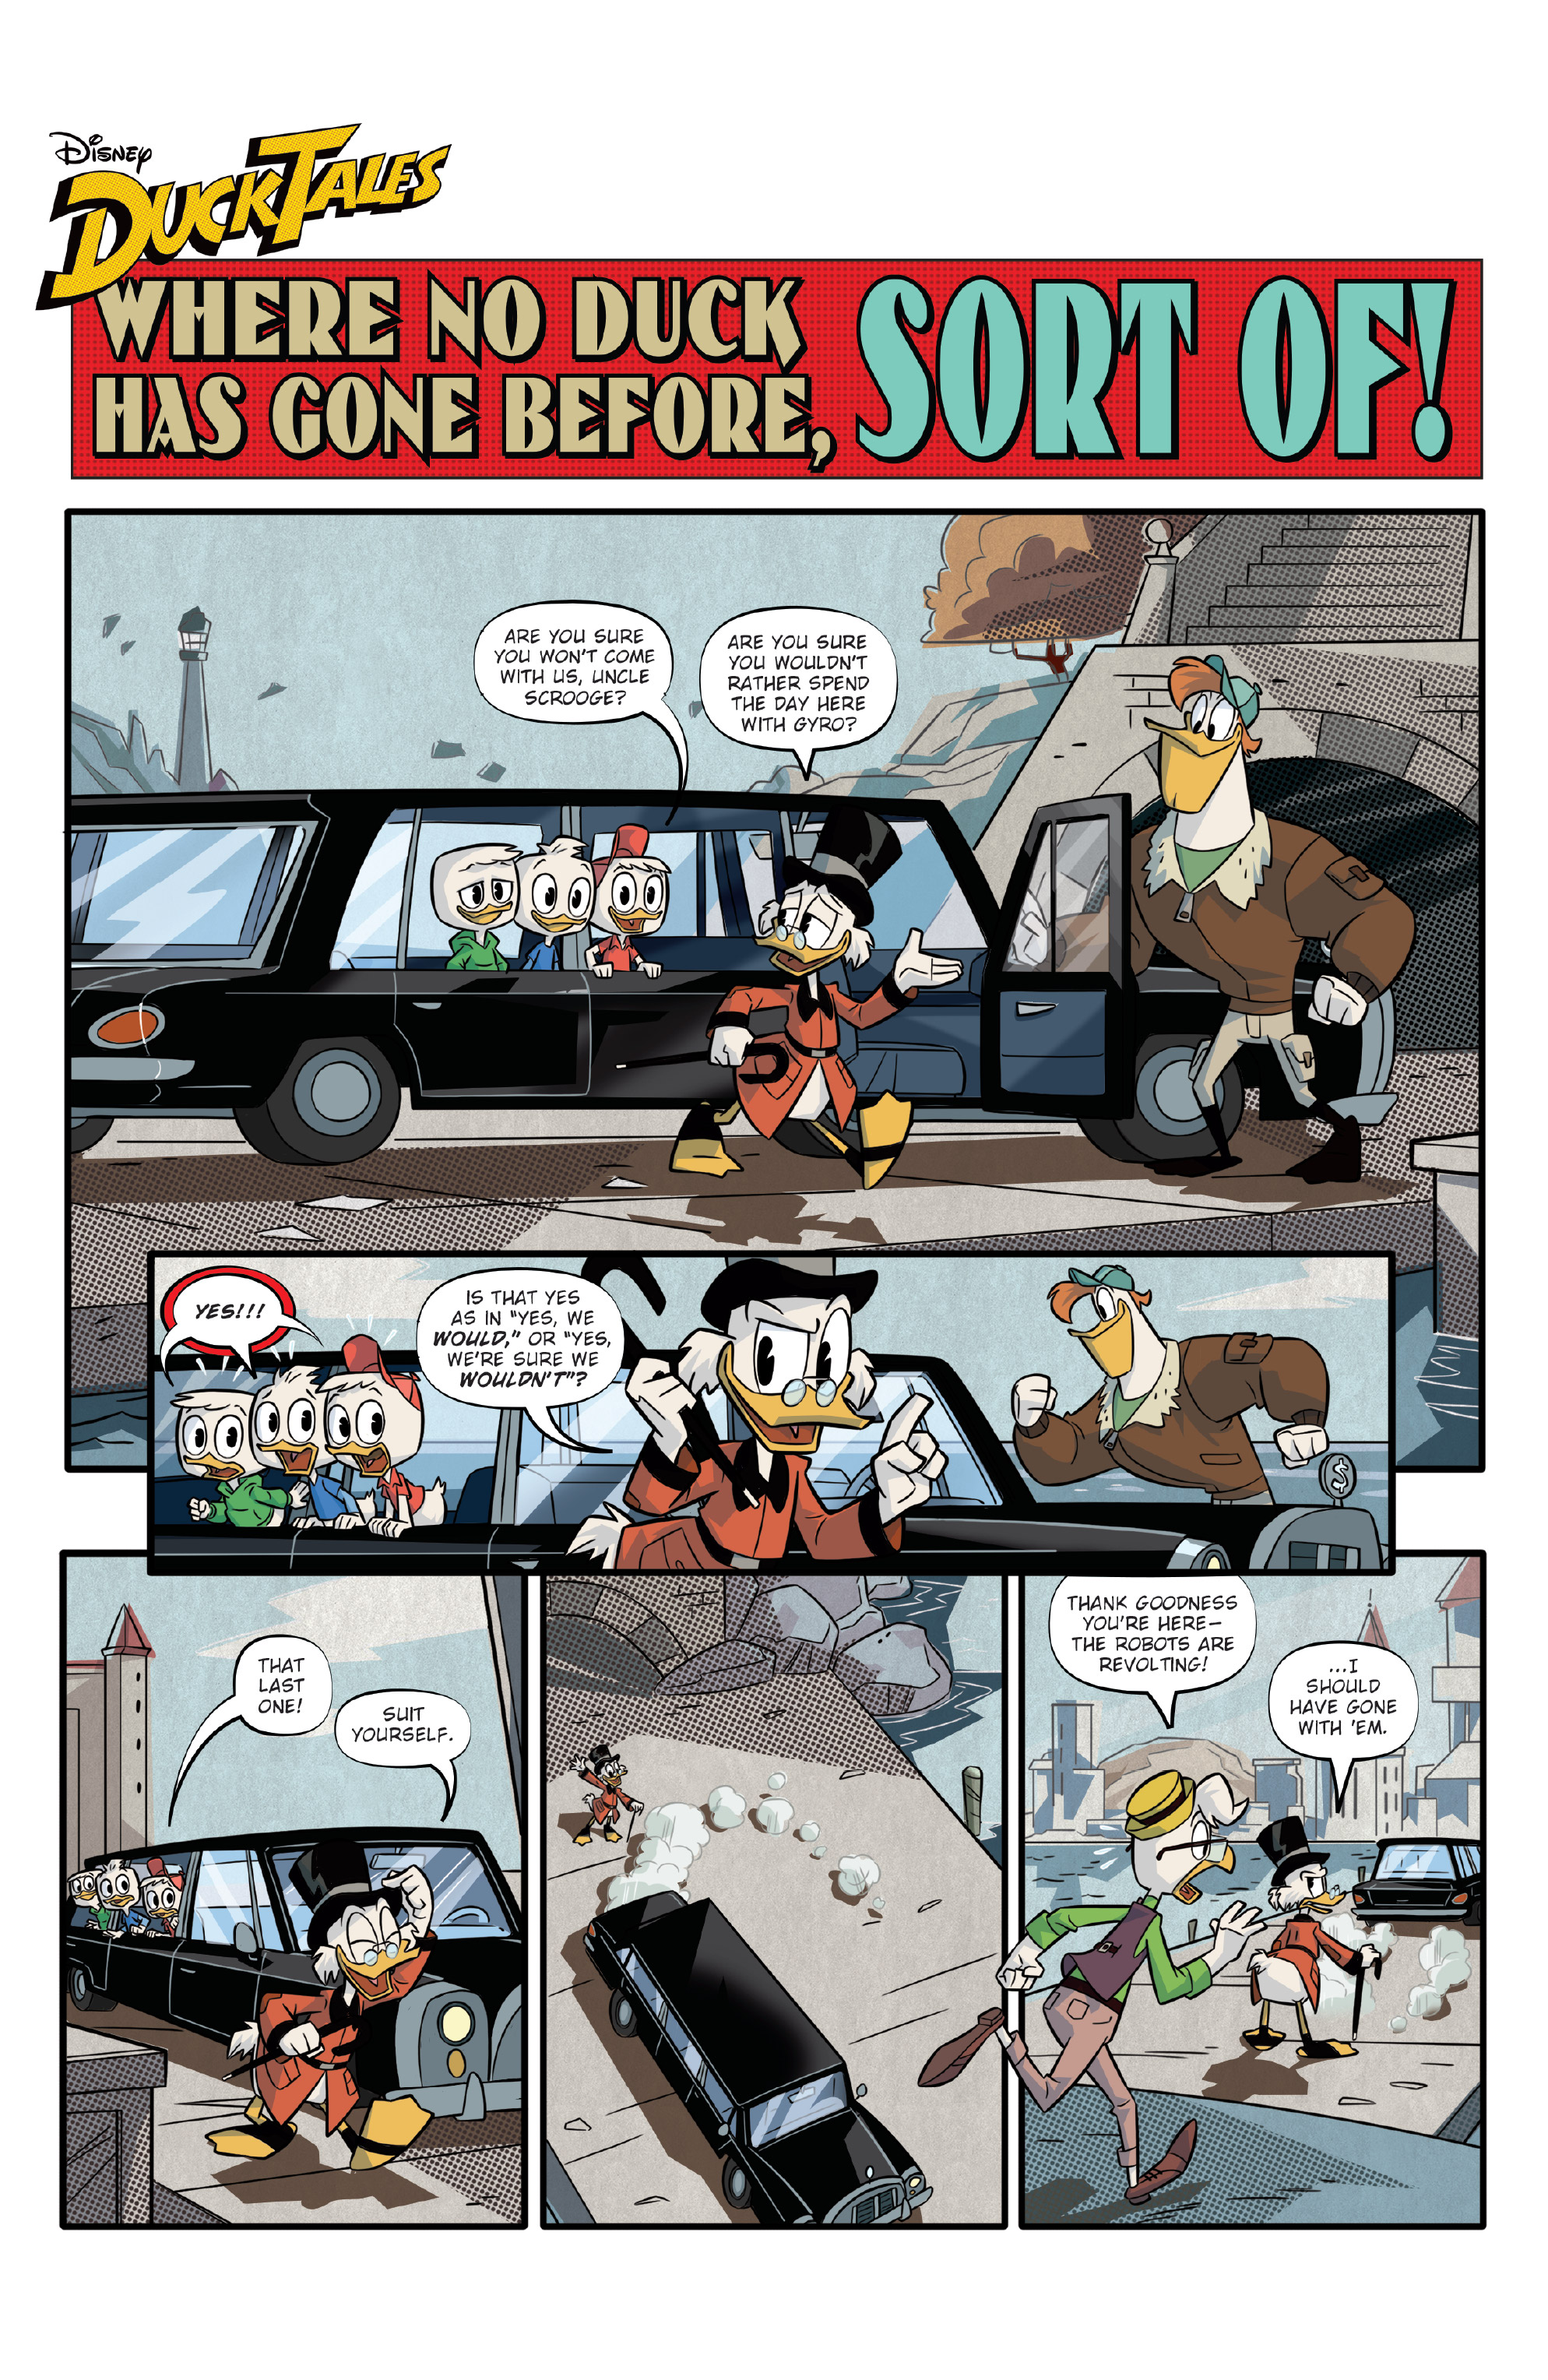 DuckTales: Silence & Science (2019-): Chapter 3 - Page 3